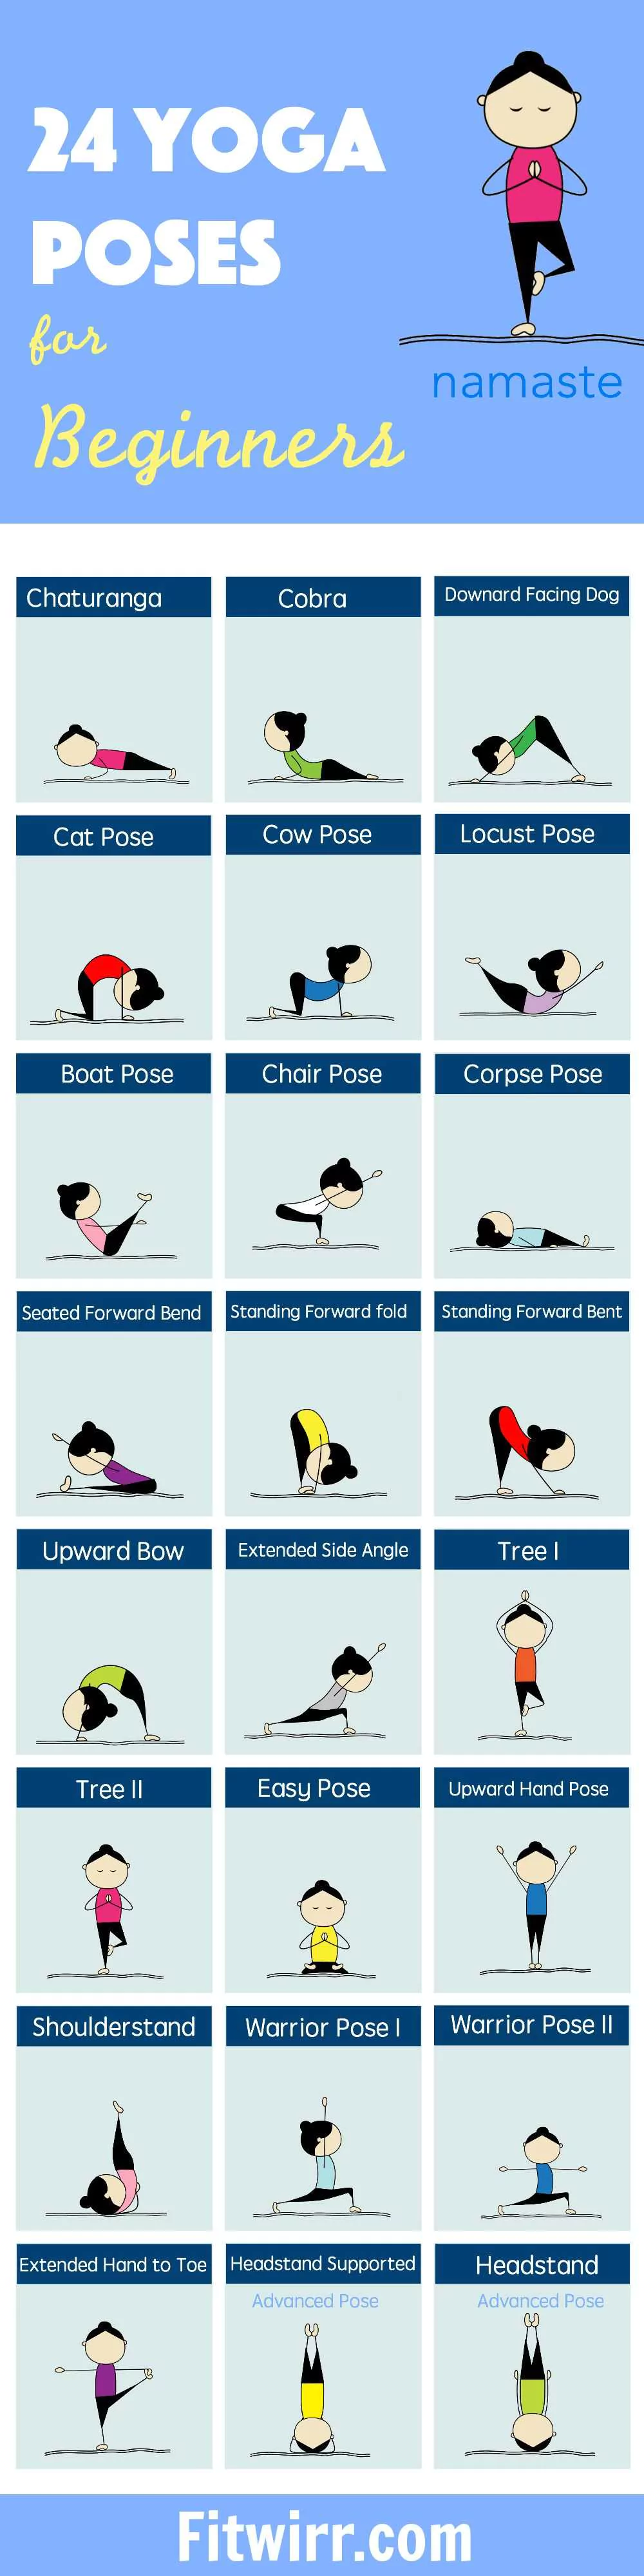 24 Yoga Poses For Beginners